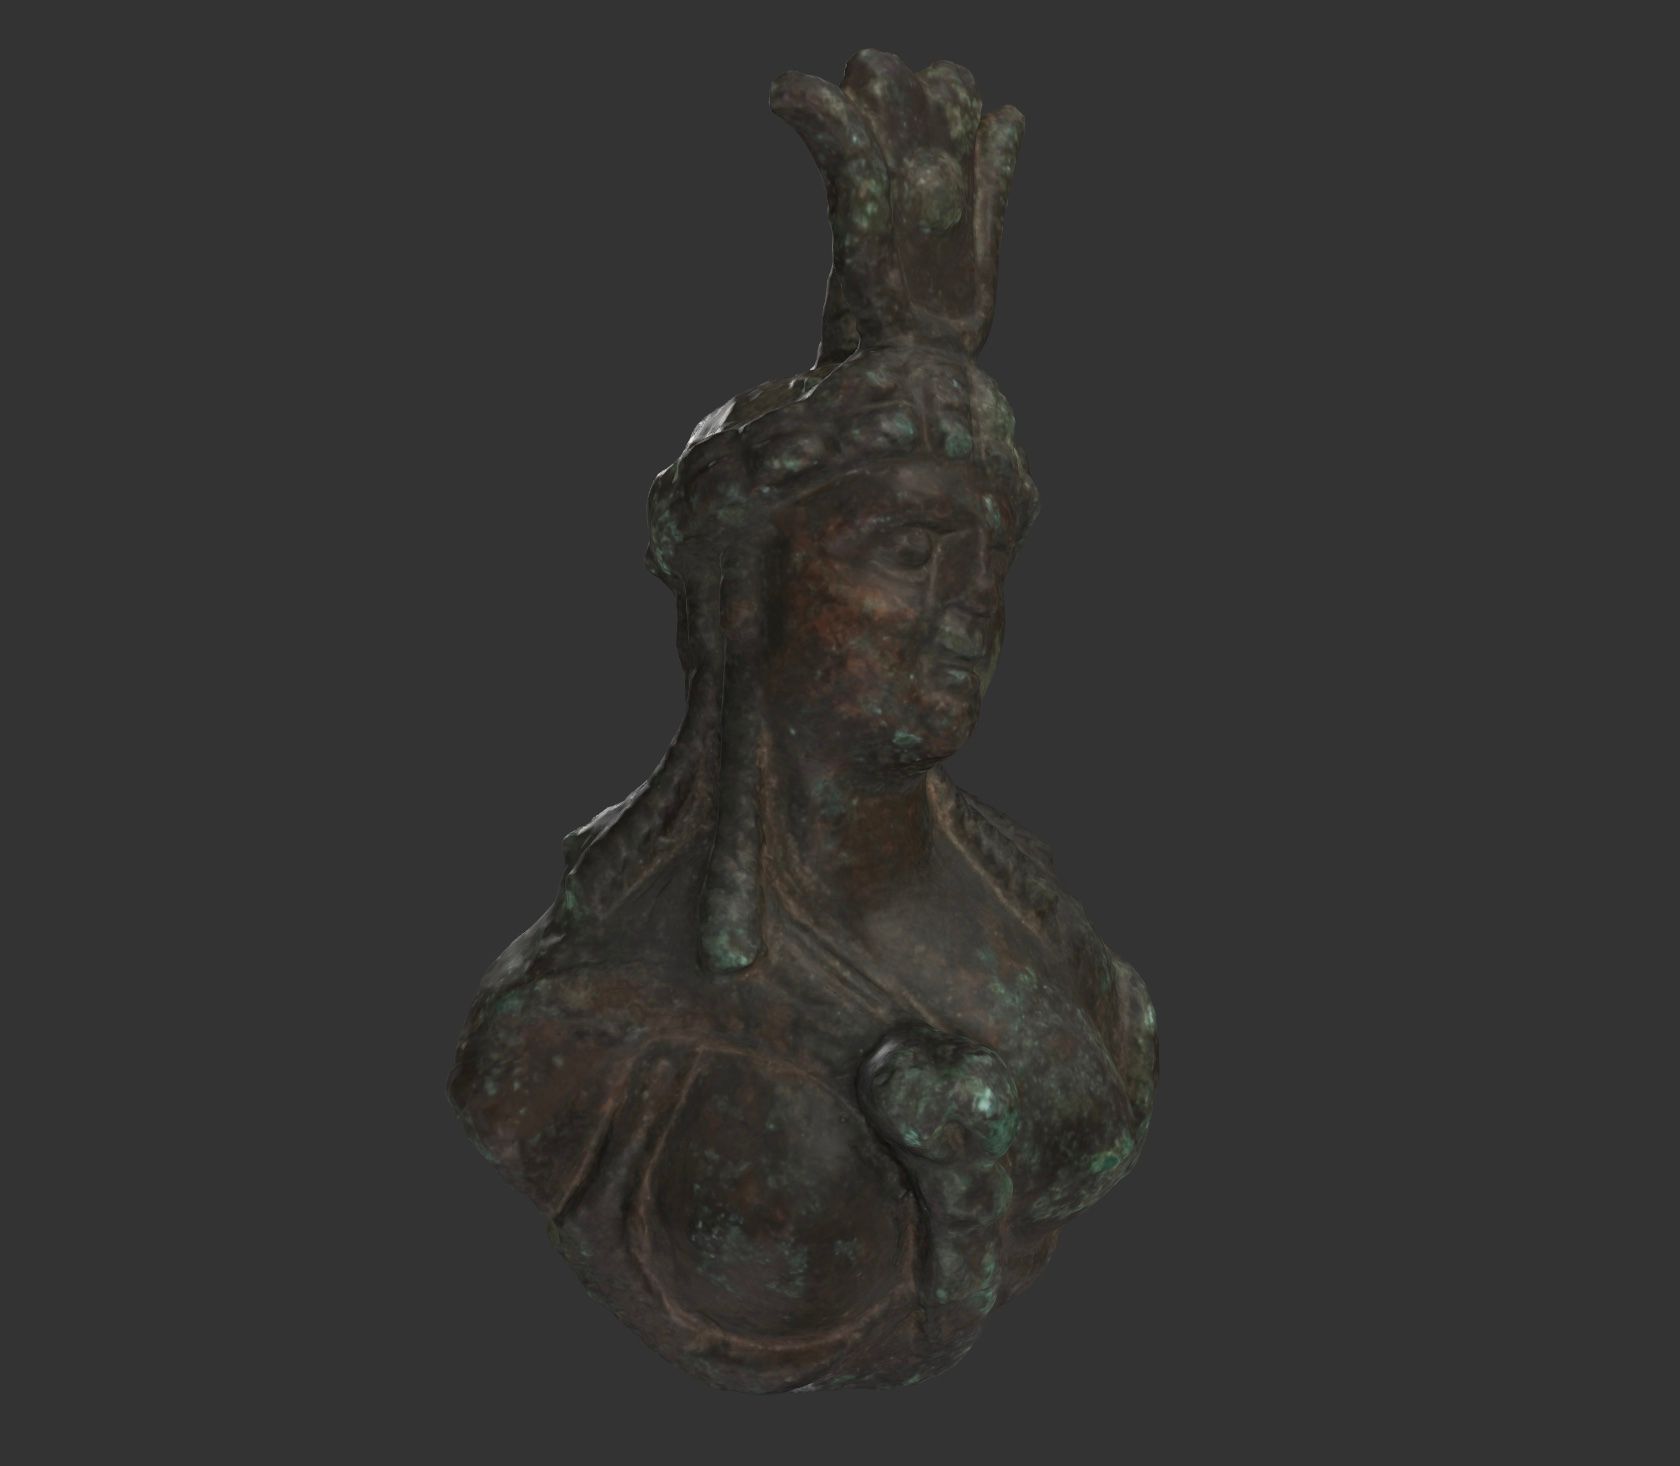 A 3d scan of a bronze bust of the egyptian goddess Isis